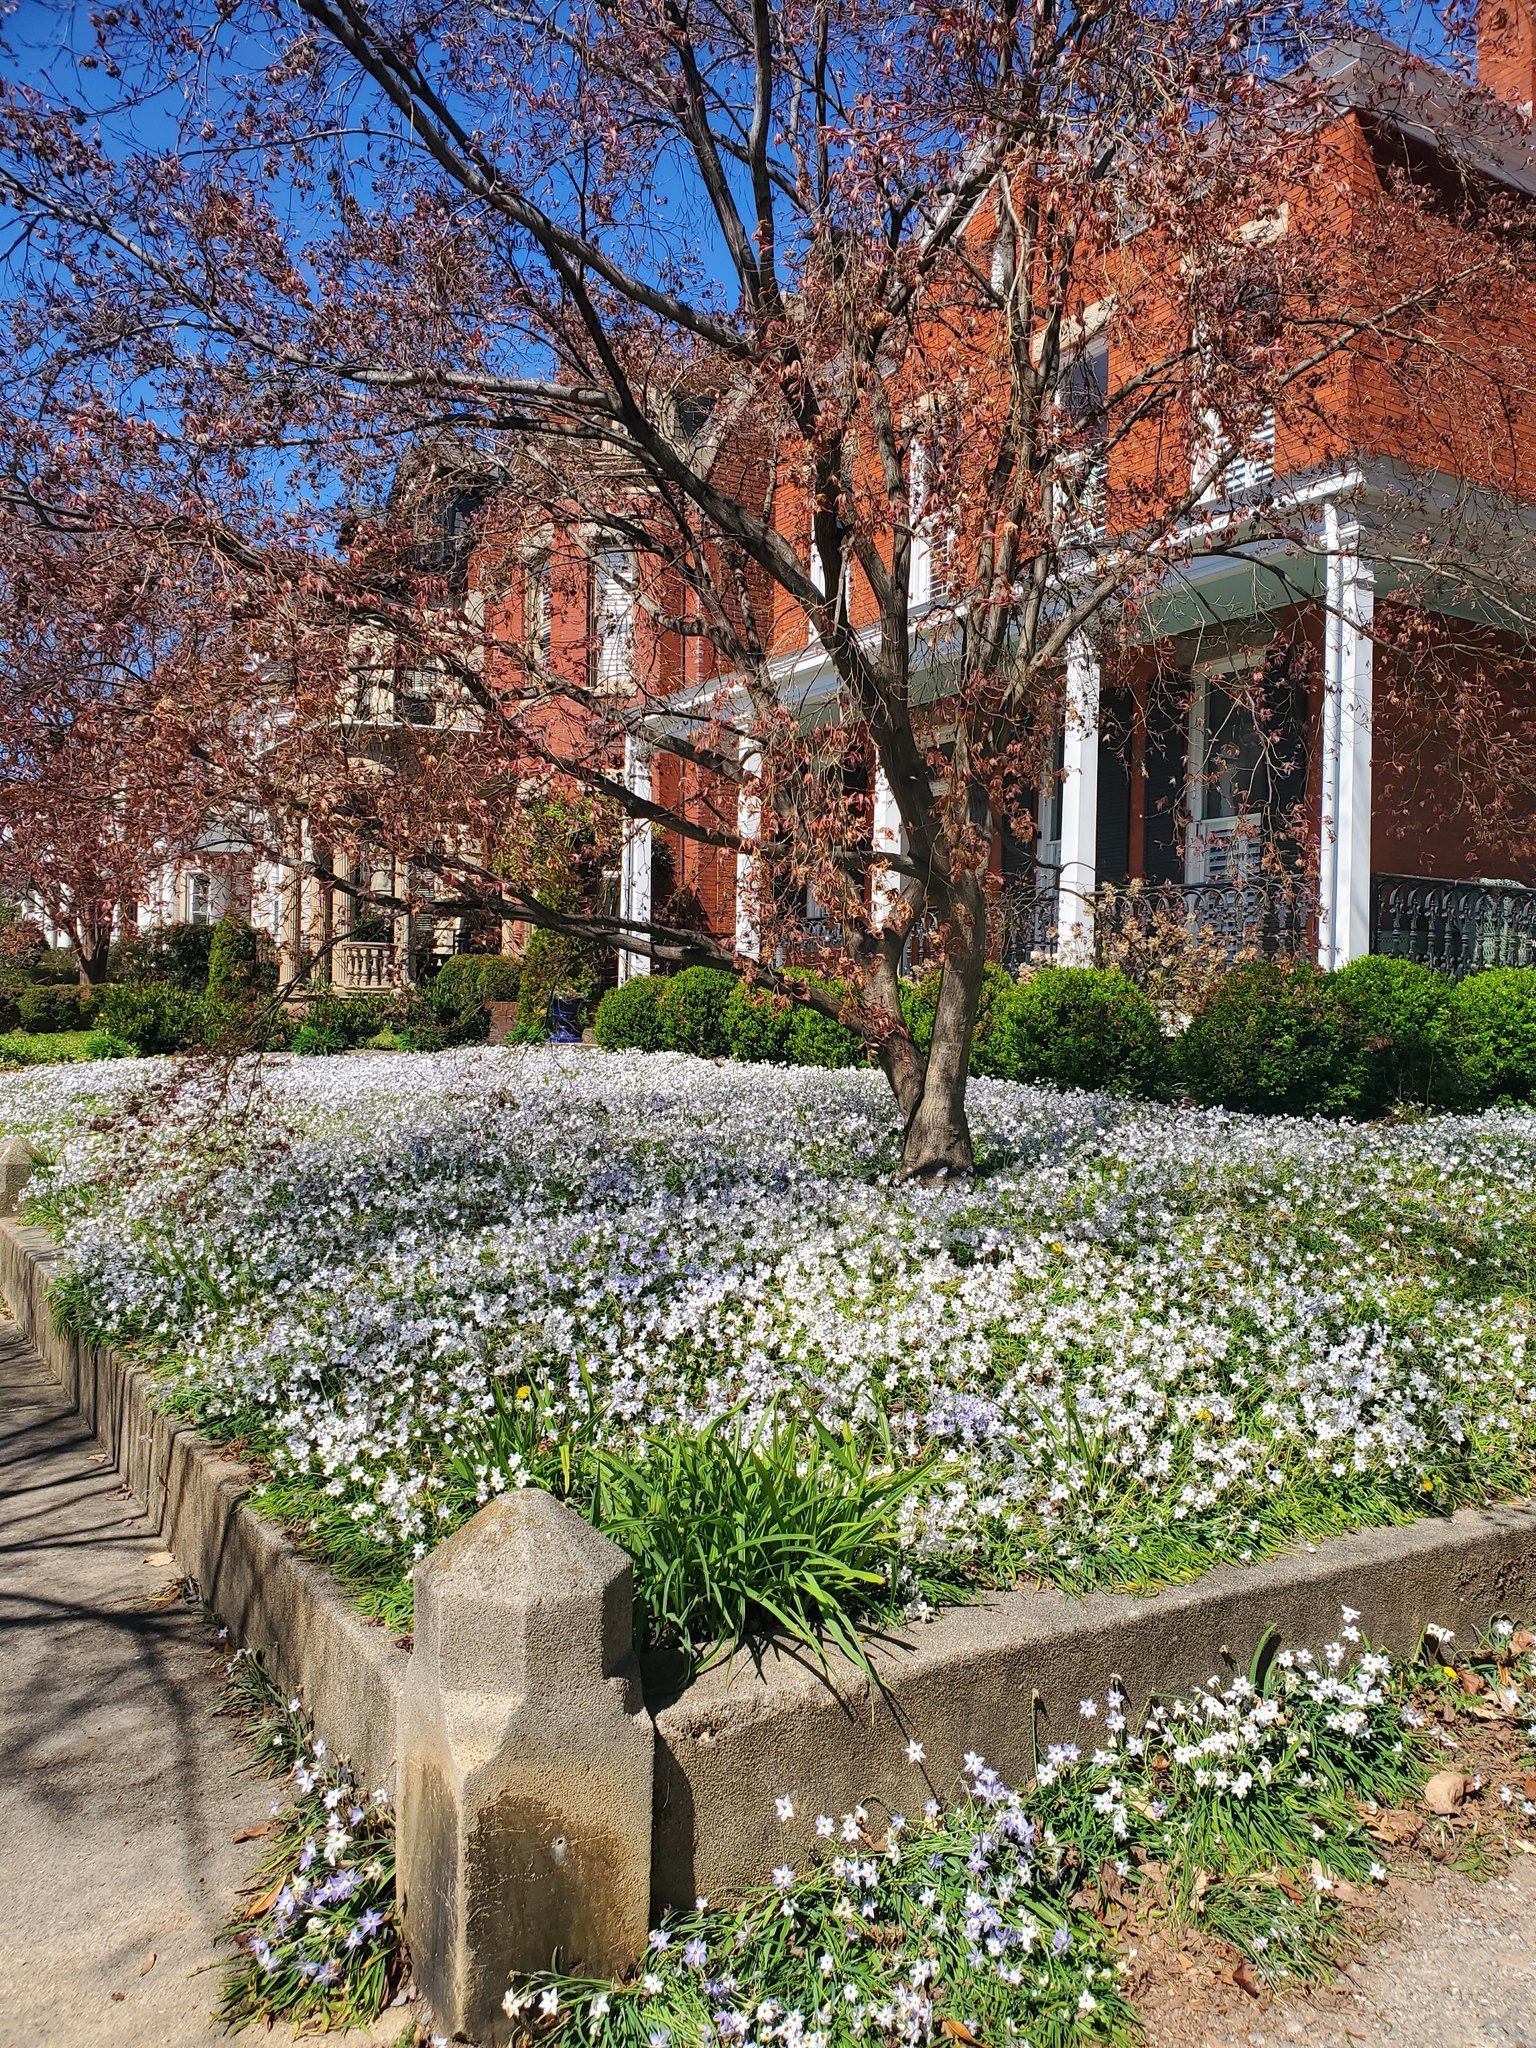 &quot;What's your perfect date?&quot;

&quot;Probably April 25th because it's not too hot, not too cold. All you need is a light jacket!&quot;

Happy Spring from @johannasdesign - We hope you are enjoying the beautiful Richmond houses and flowers as 